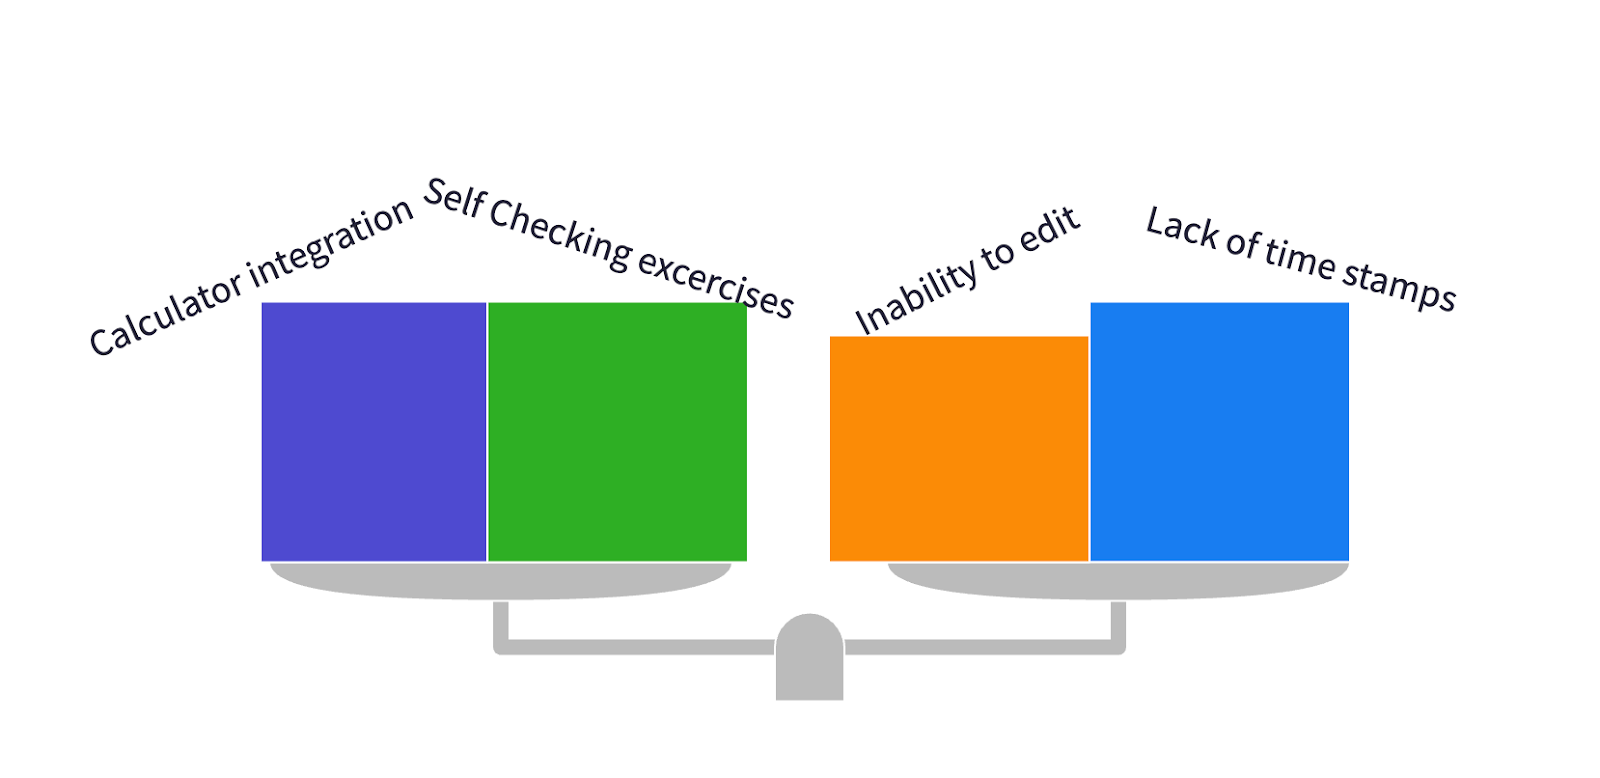 A balance showing "Calculator integration" and "Self Checking exercises" on one side; "Inability to edit" and "Lack of time stamps" on the other. The balance is level.